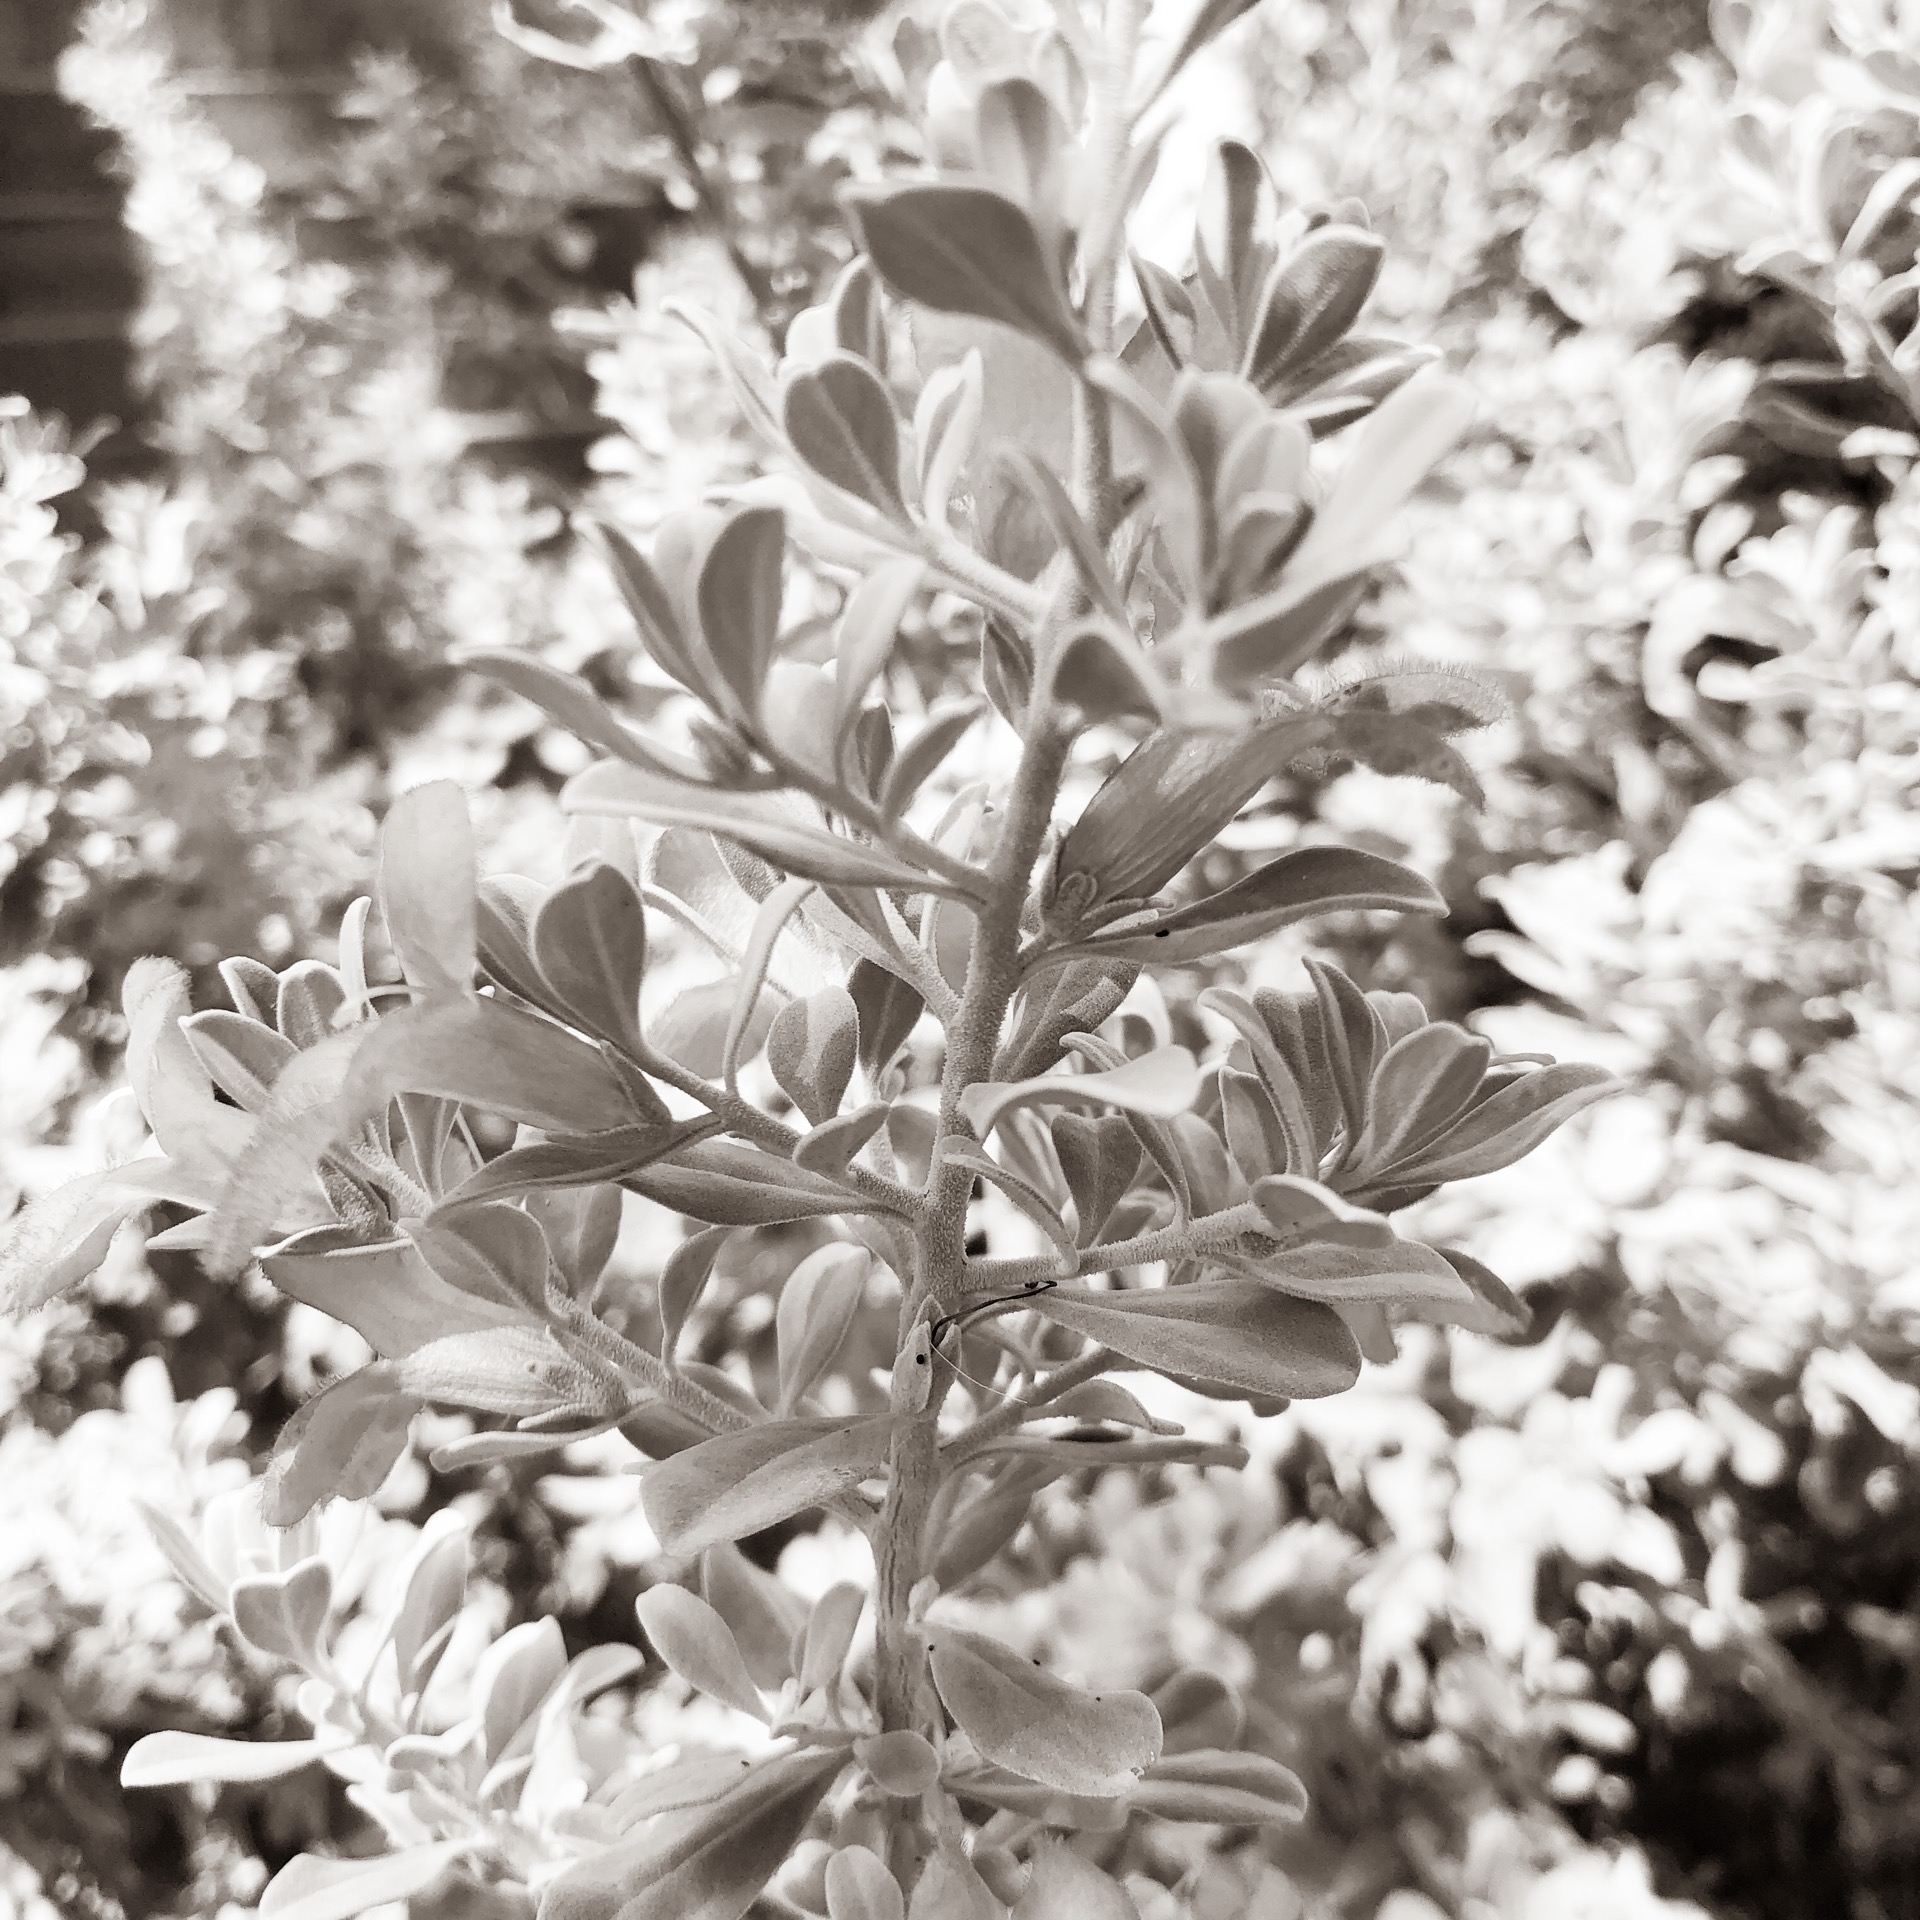 Album art for the album “Christmas v1”. Black and white photo. Featuring trademark double exposure closeup of Texas Purple Sage. This cover features no distinct flowers. The high-contrast black and white gives a “wintery vibe”.